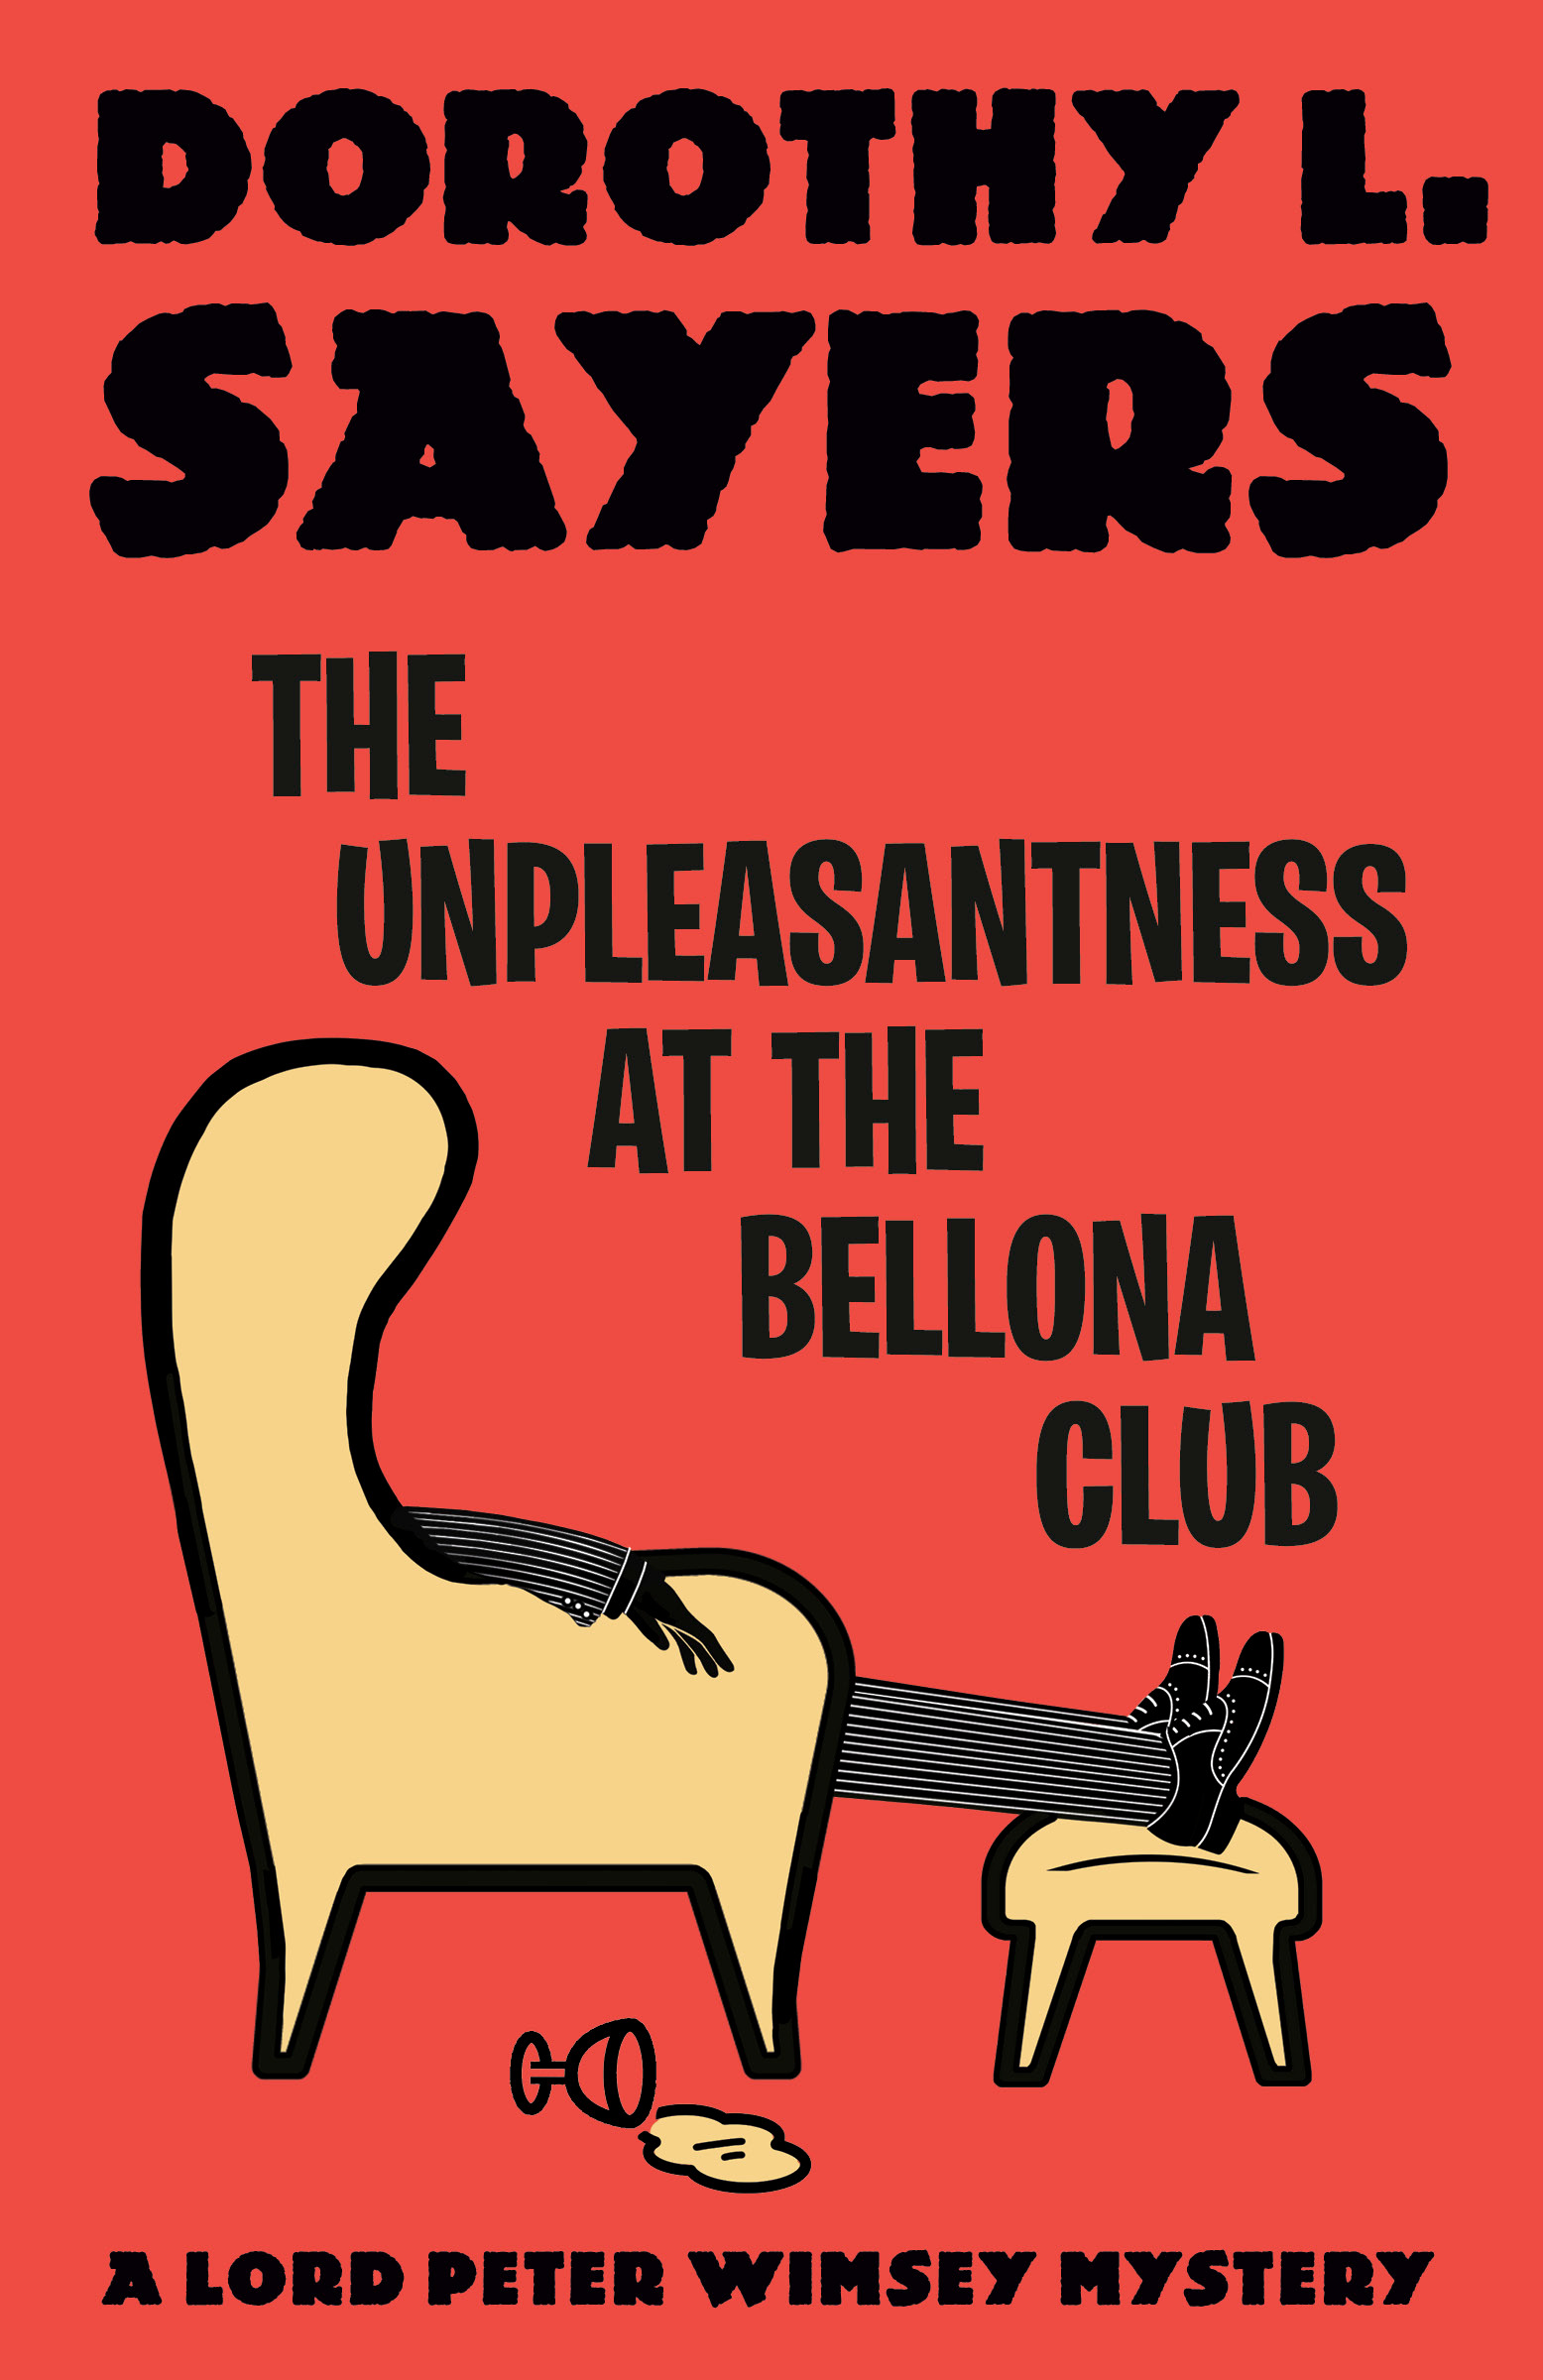 The Unpleasantness at the Bellona Club : A Lord Peter Wimsey Mystery | Sayers, Dorothy L. (Auteur)